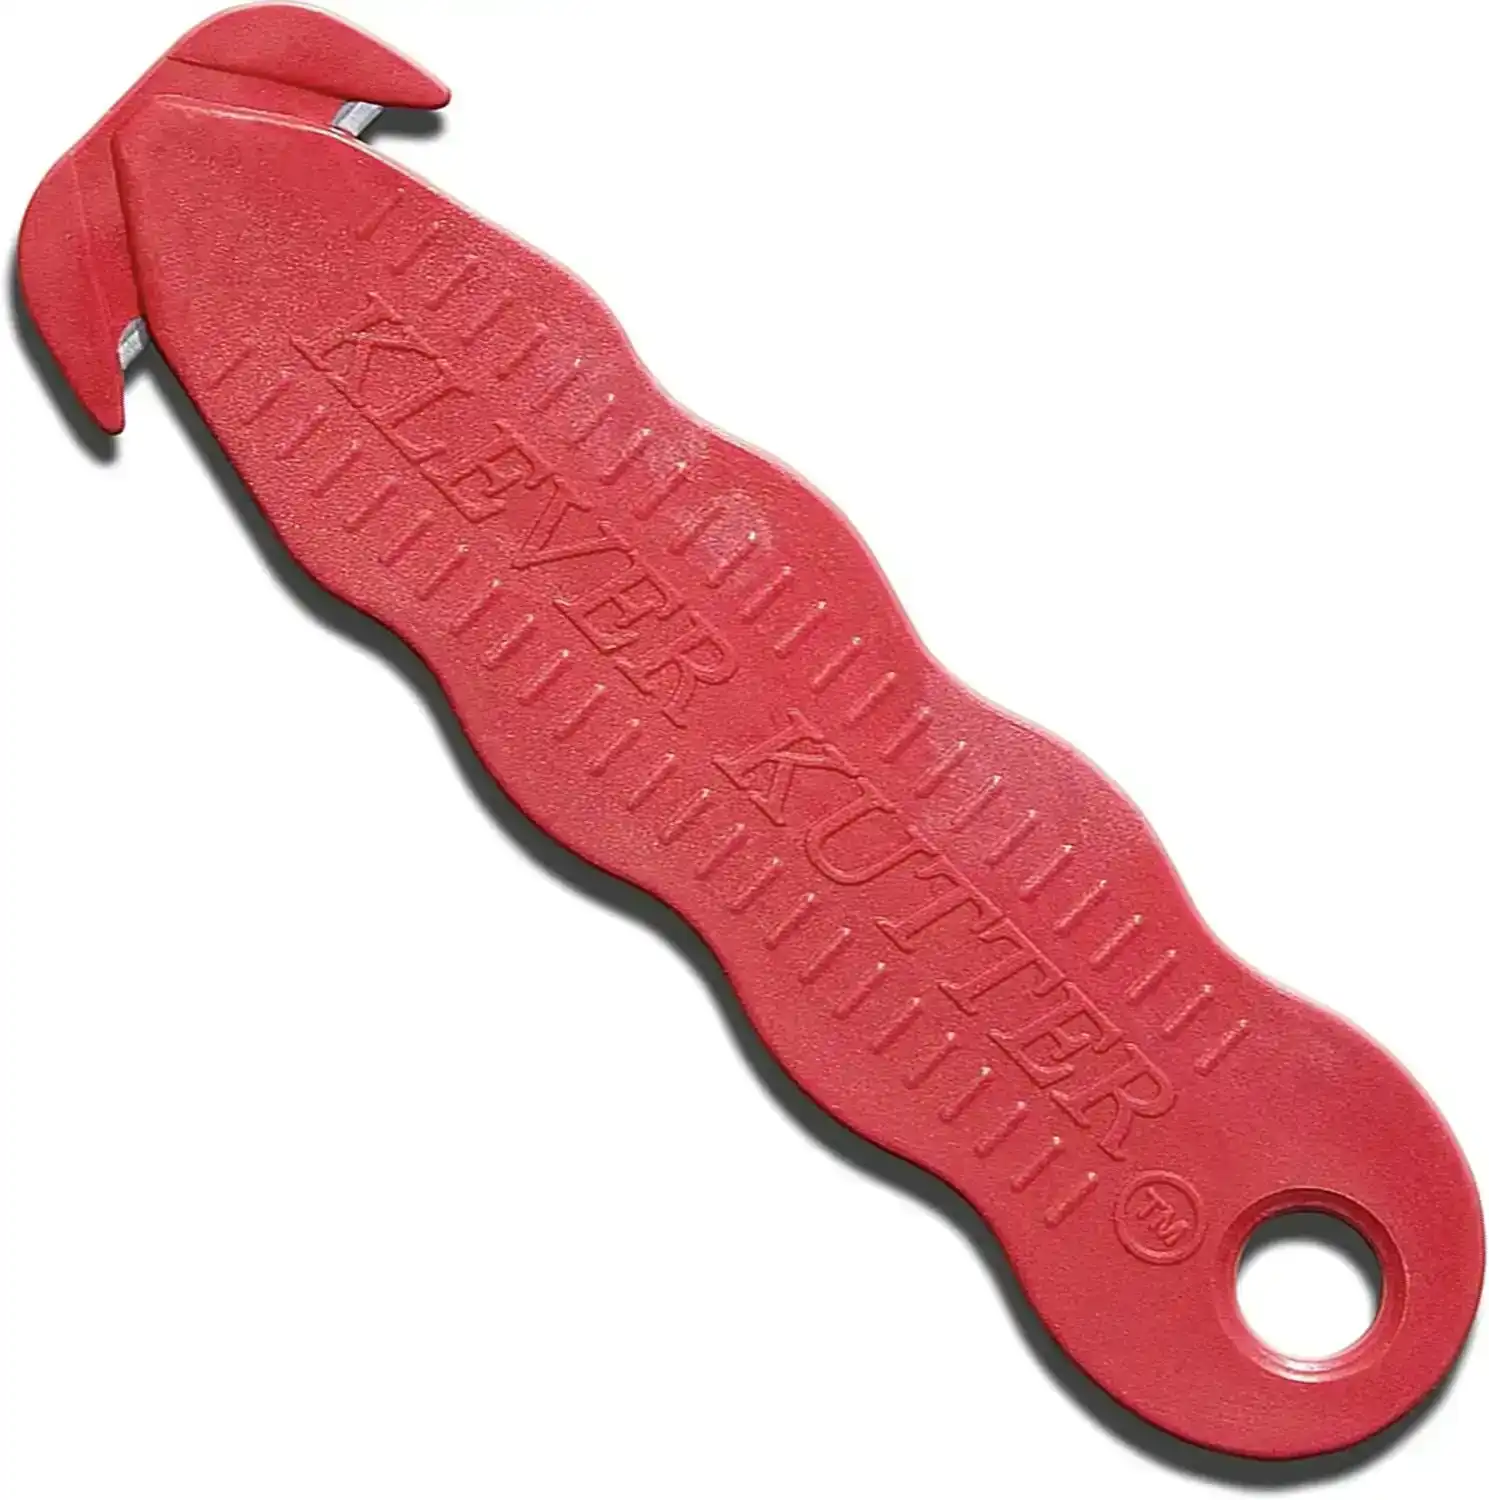 Klever Kutter Safety Cutter Utility Knife Patented Recessed Blade - Red - Made in USA